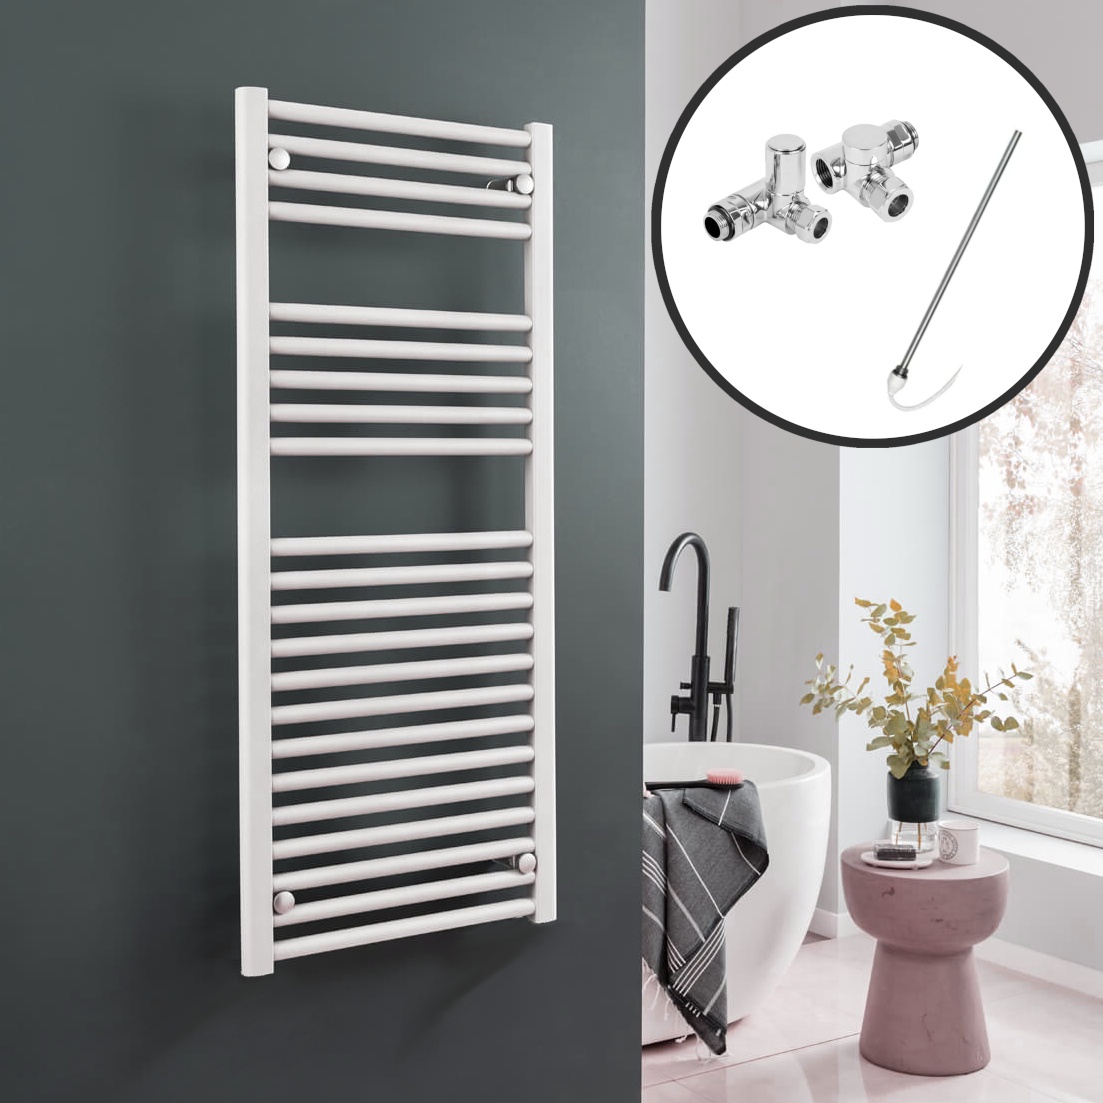 Bray Straight or Flat Heated Towel Rail / Warmer, White – Dual Fuel, Electric Best Quality & Price, Energy Saving / Economic To Run Buy Online From Adax SolAire UK Shop